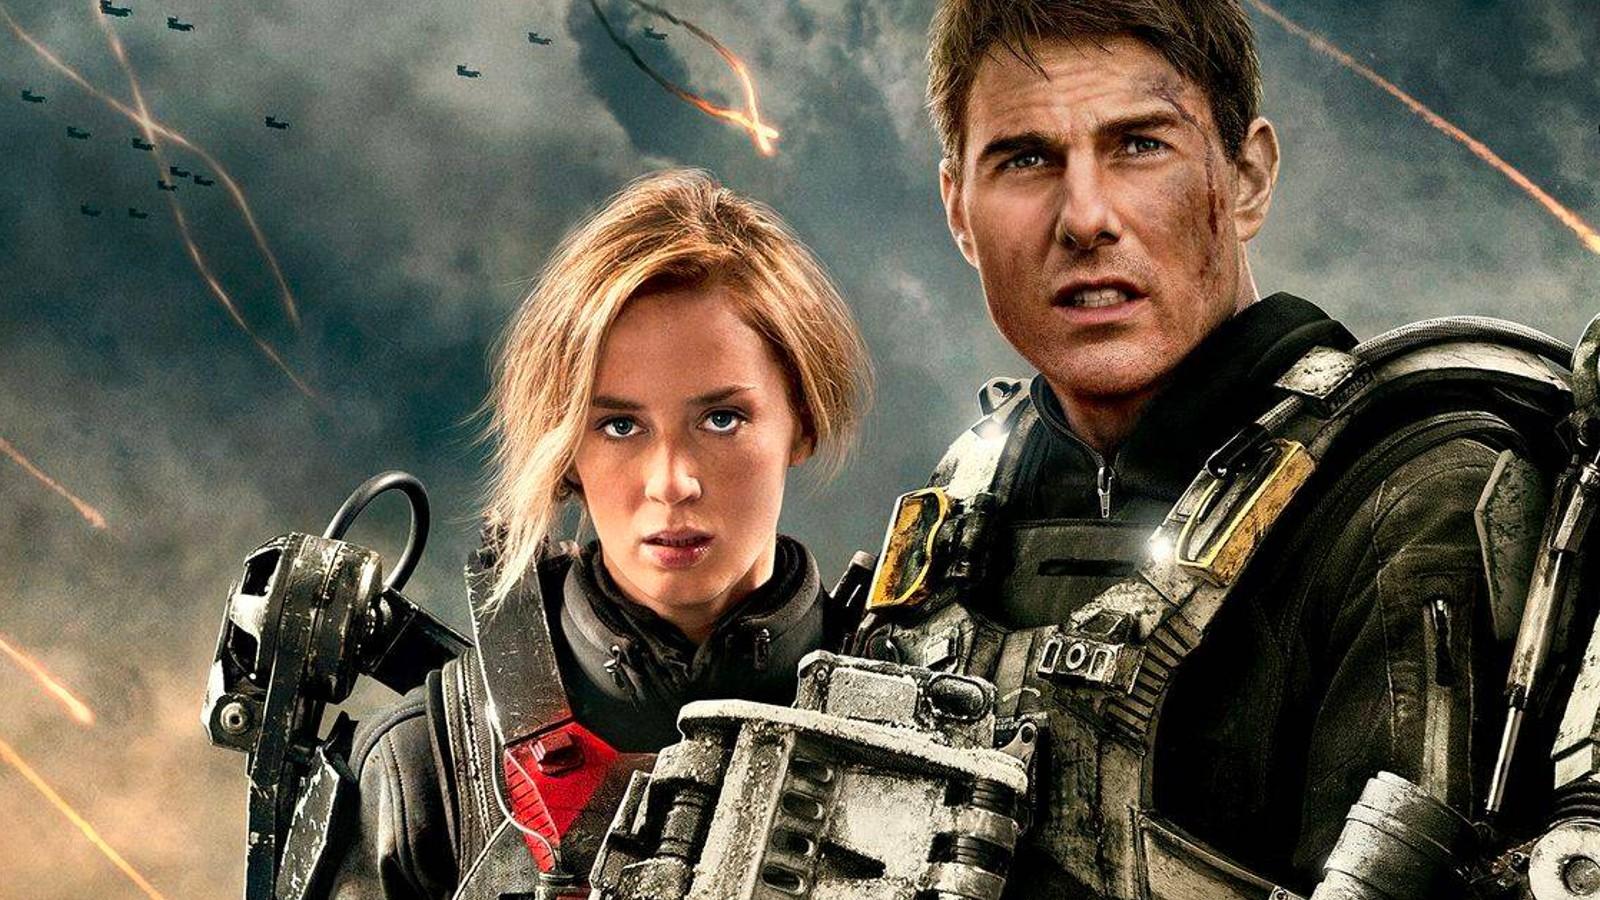 Emily Blunt and Tom Cruise on the poster for Edge of Tomorrow